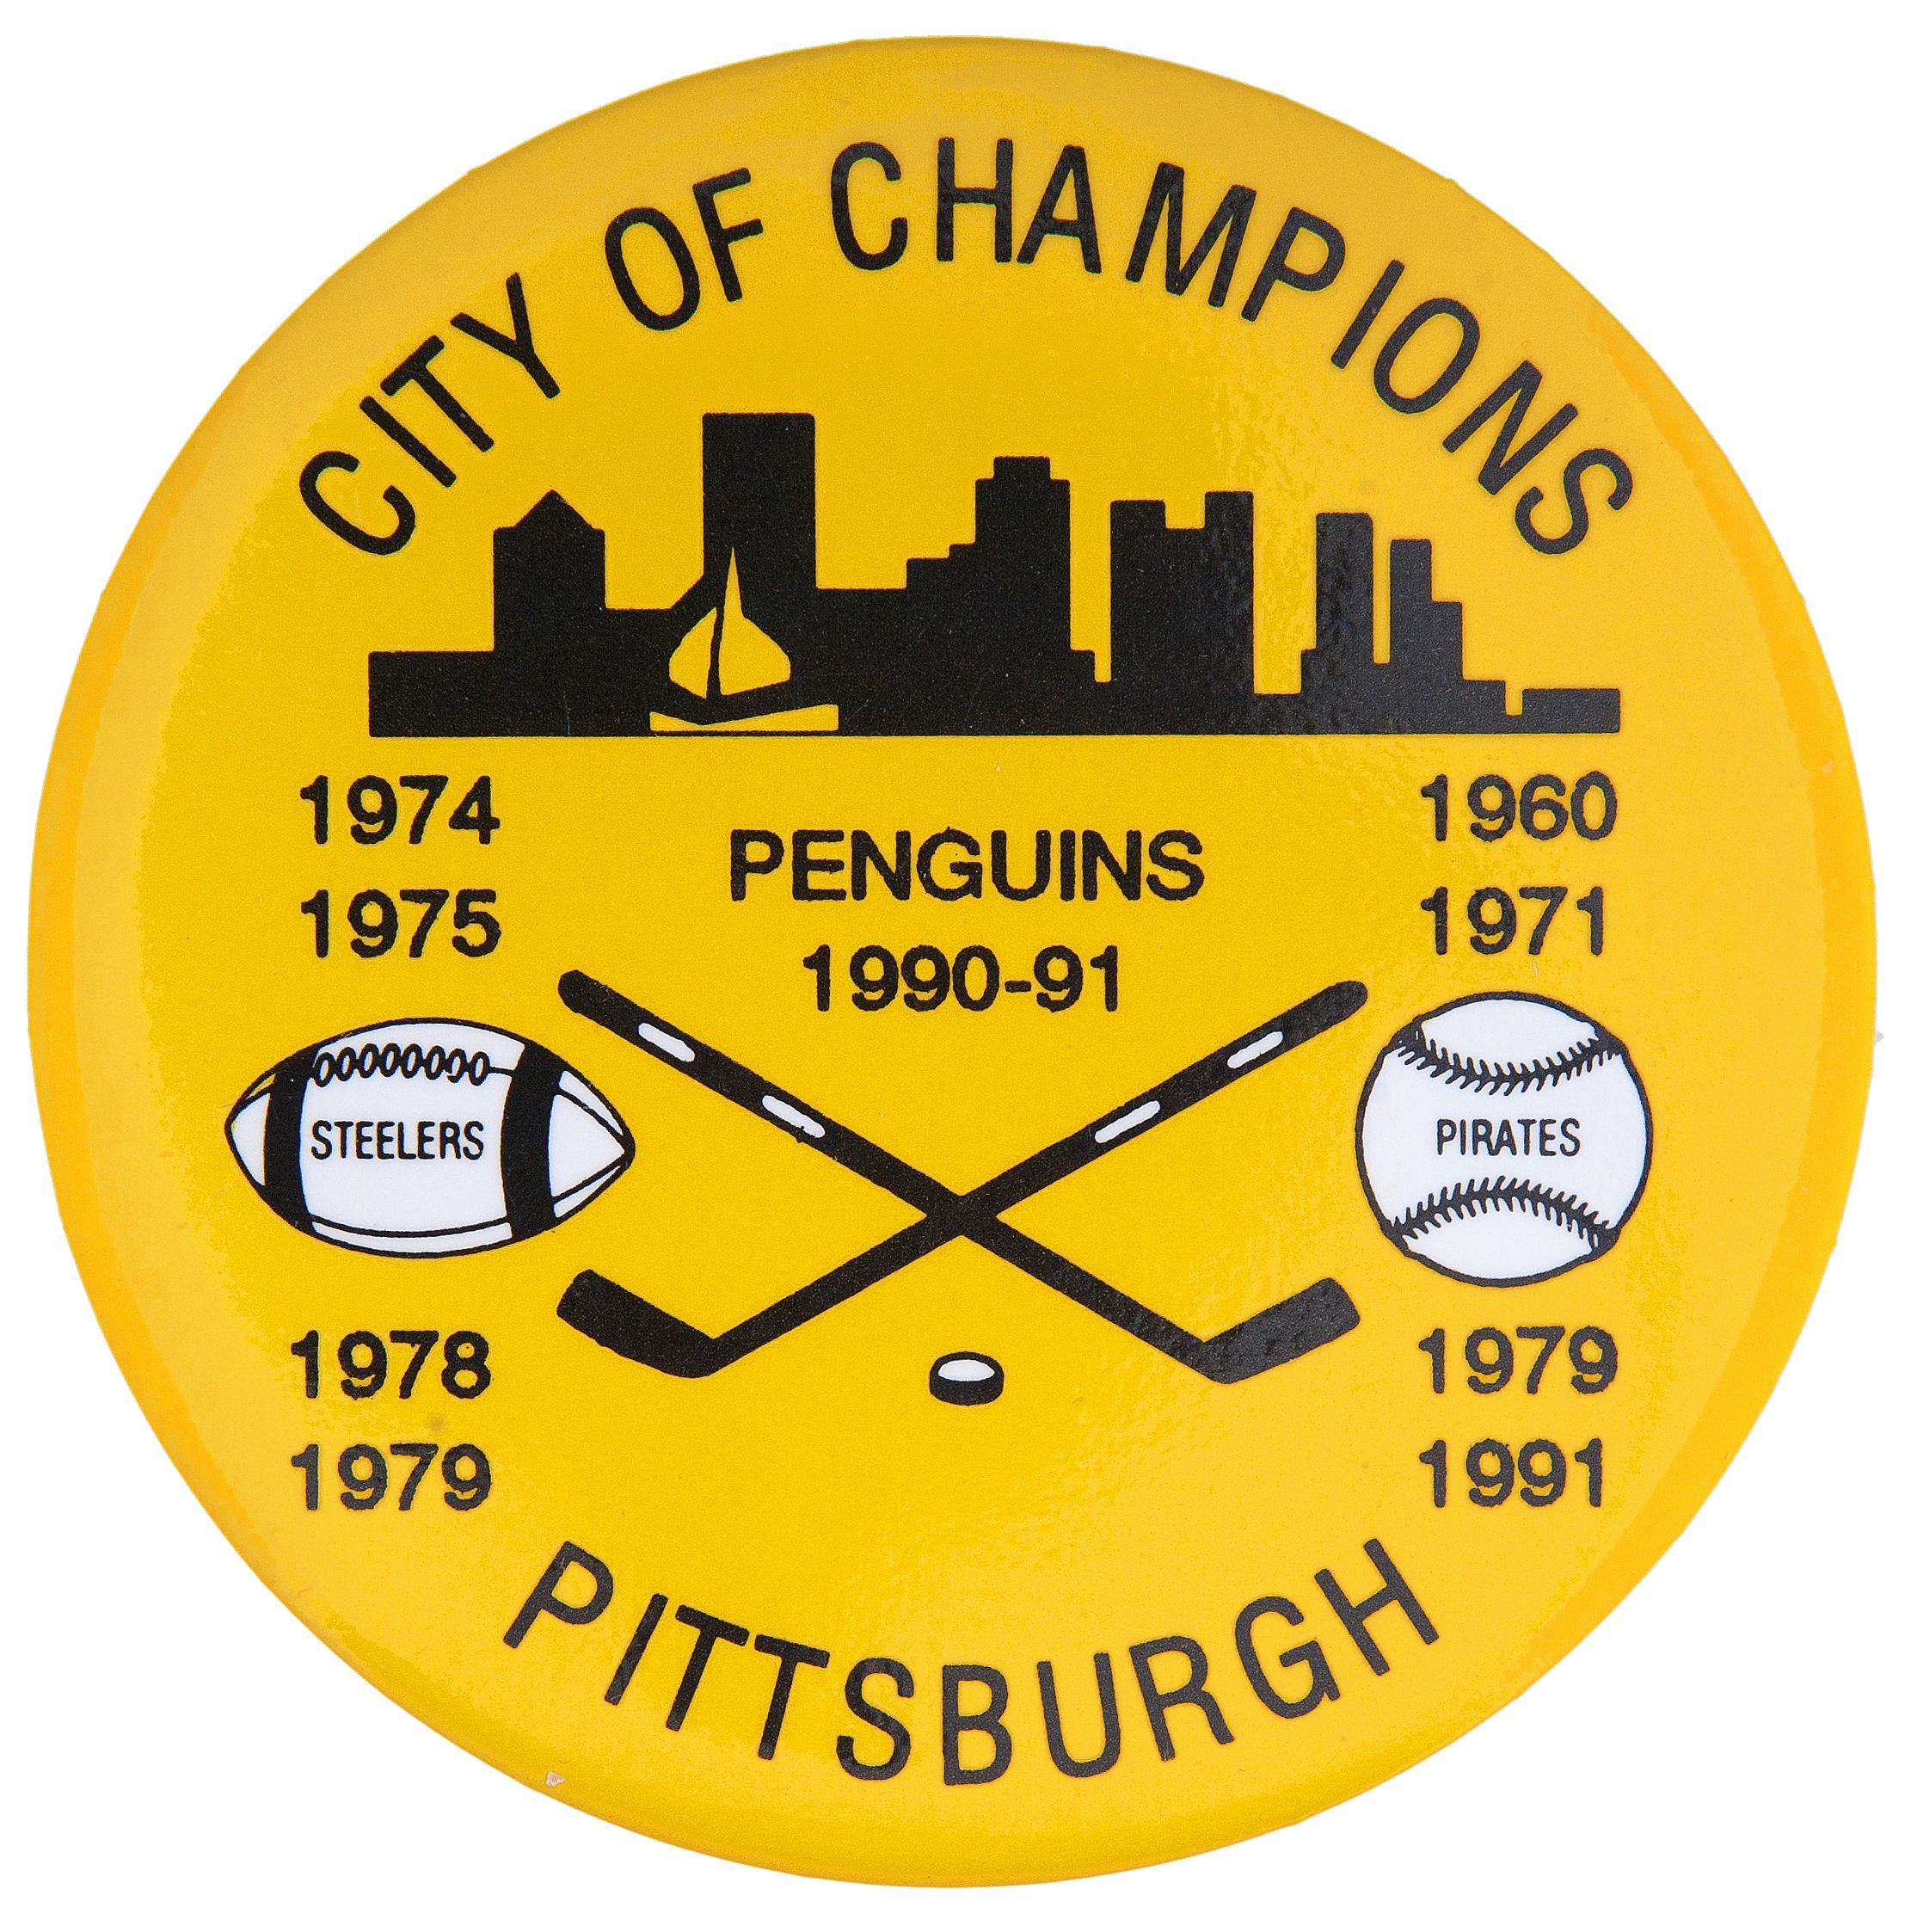 Item Detail - PITTSBURGH “CITY OF CHAMPIONS” STEELERS, PIRATES, PENGUINS  WINNING YEARS SPORTS BUTTON.